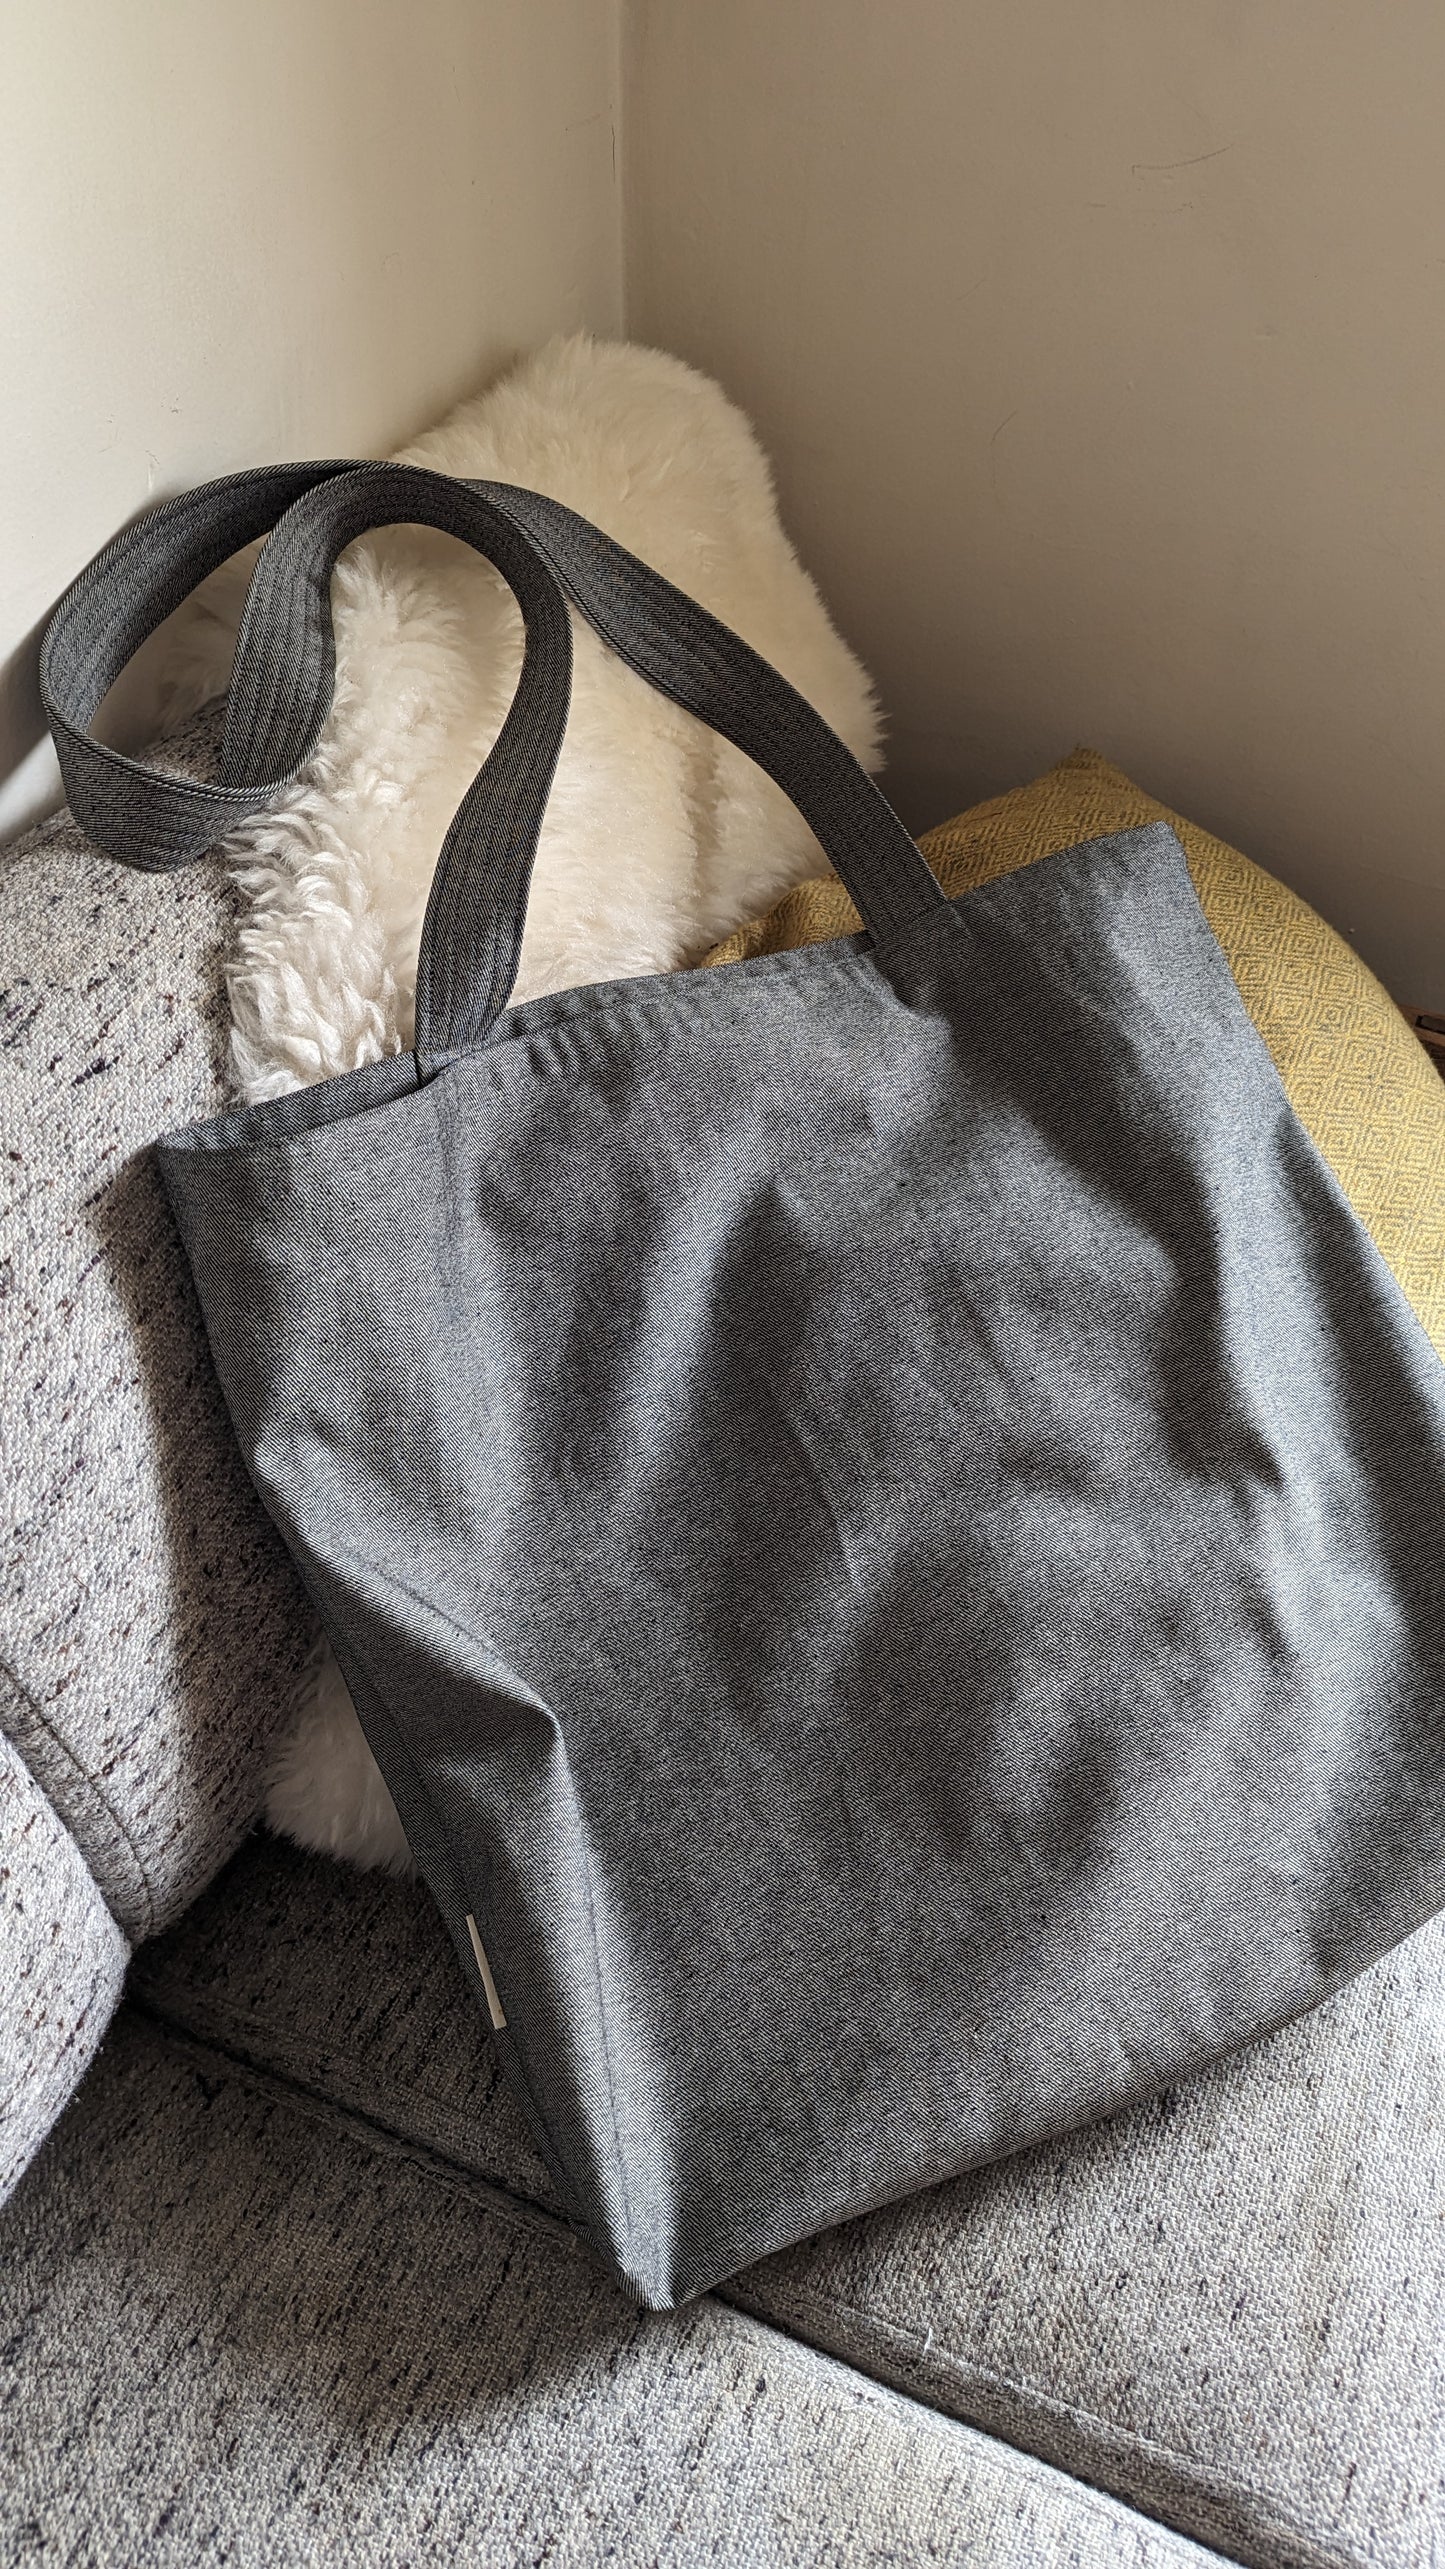 Japanese Raw Denim Haul-All Tote Bag with Extra-Long Strap (Pebble) by Connally Goods